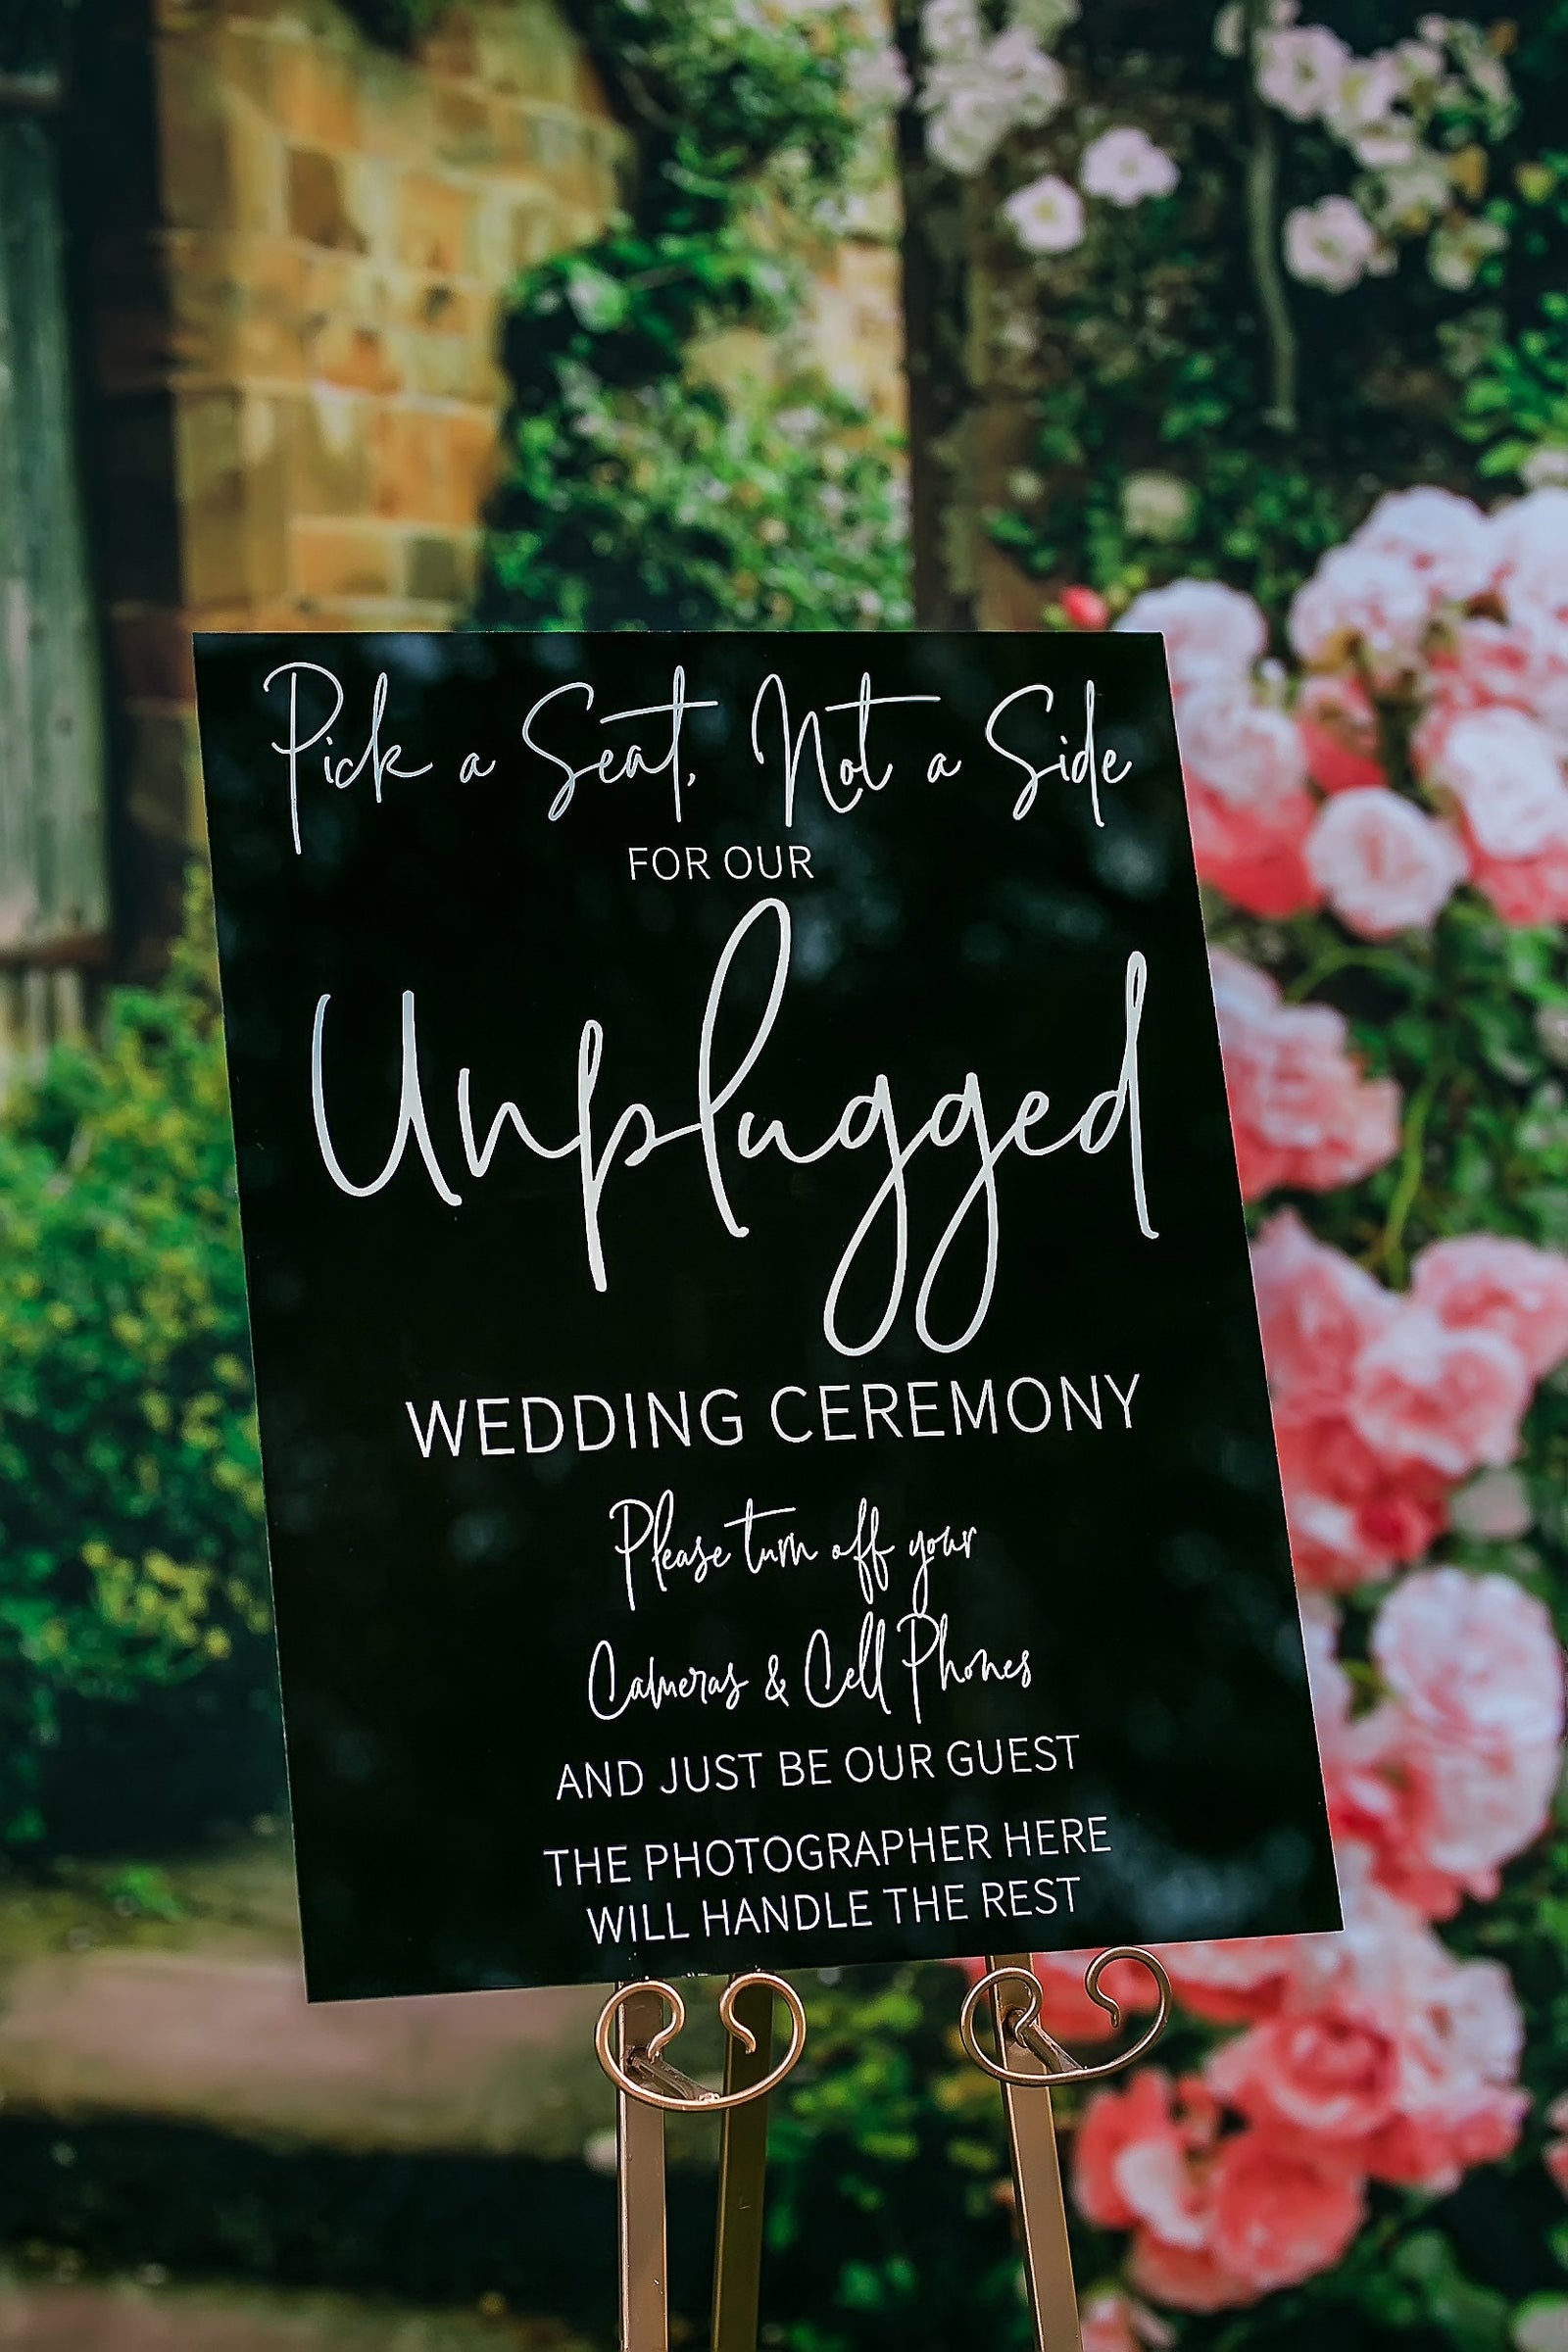 Free Printable Wedding Sign 18x24 - Choose a Seat Not a Side